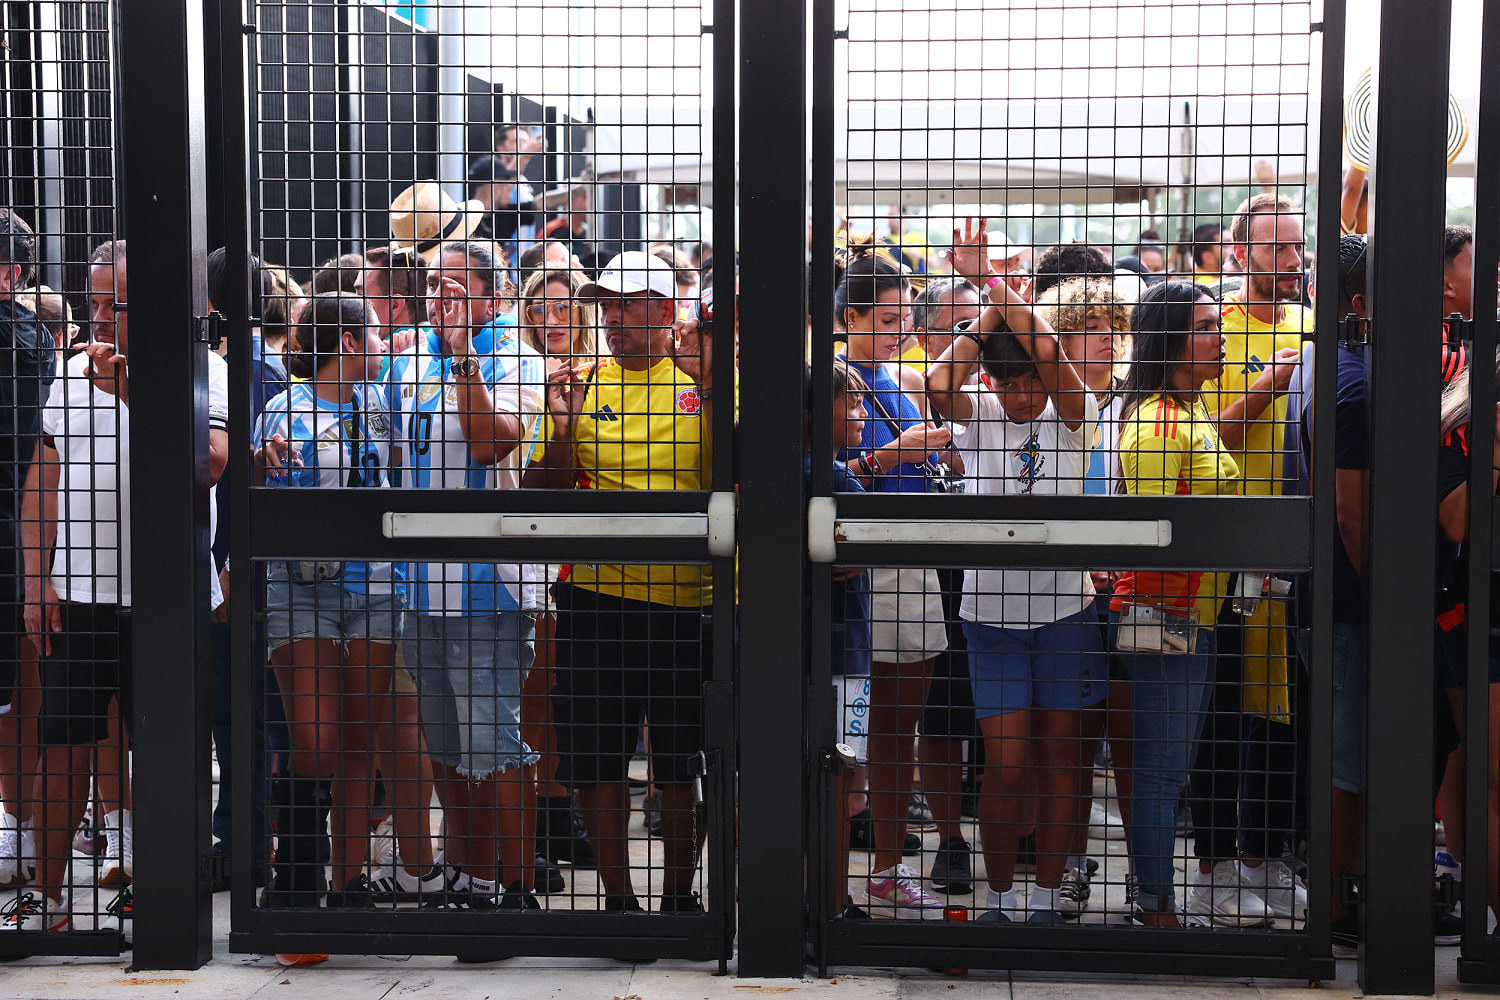 Mayhem at Copa America gates in Miami prevented ticketed fans from getting into game 